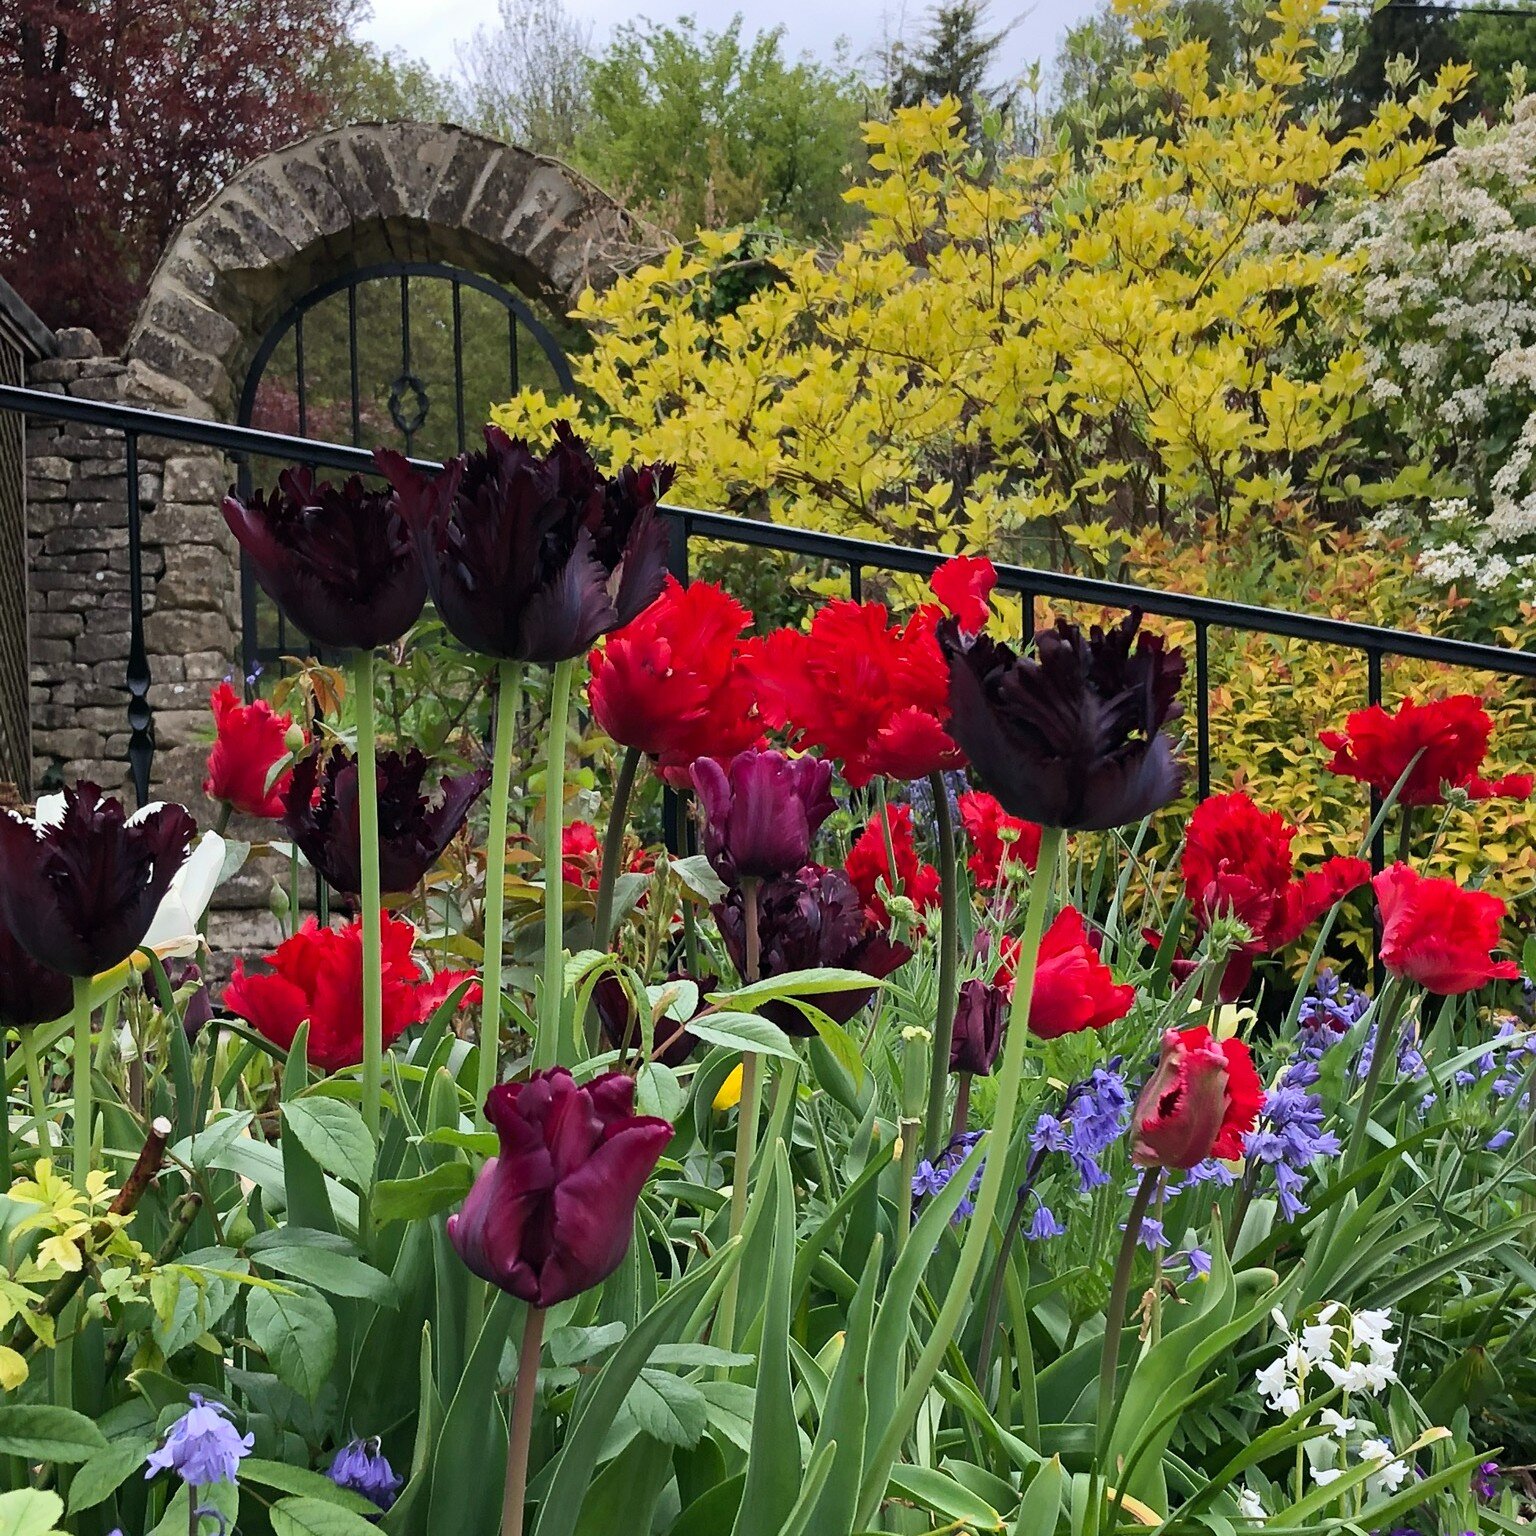 We&rsquo;re pleased to offer garden maintenance as part of our services, ensuring our clients&rsquo; gardens look their best all year round. Five years ago, we came to the rescue of this Cotswold garden in Bisley. As well as maintaining the establish